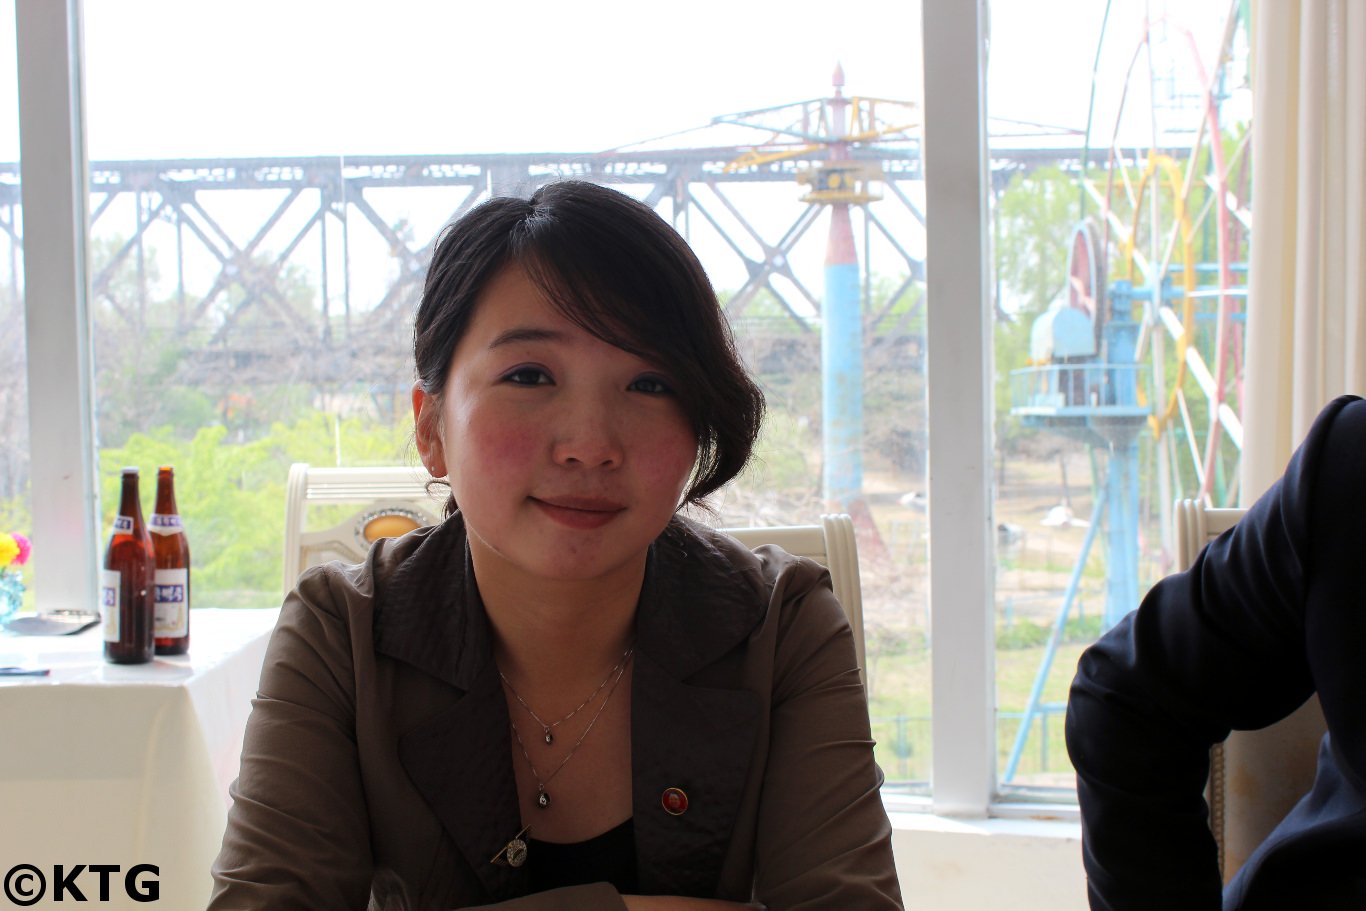 Ms Kim, North Korean guide from Pyongyang having lunch at the Myohyansgan agency restaurant in Sinuiju city in North Korea, DPRK, just across from Dandong in China. The bridge in the background is the friendhsip bridge that connects both countries. Picture taken by KTG Tours